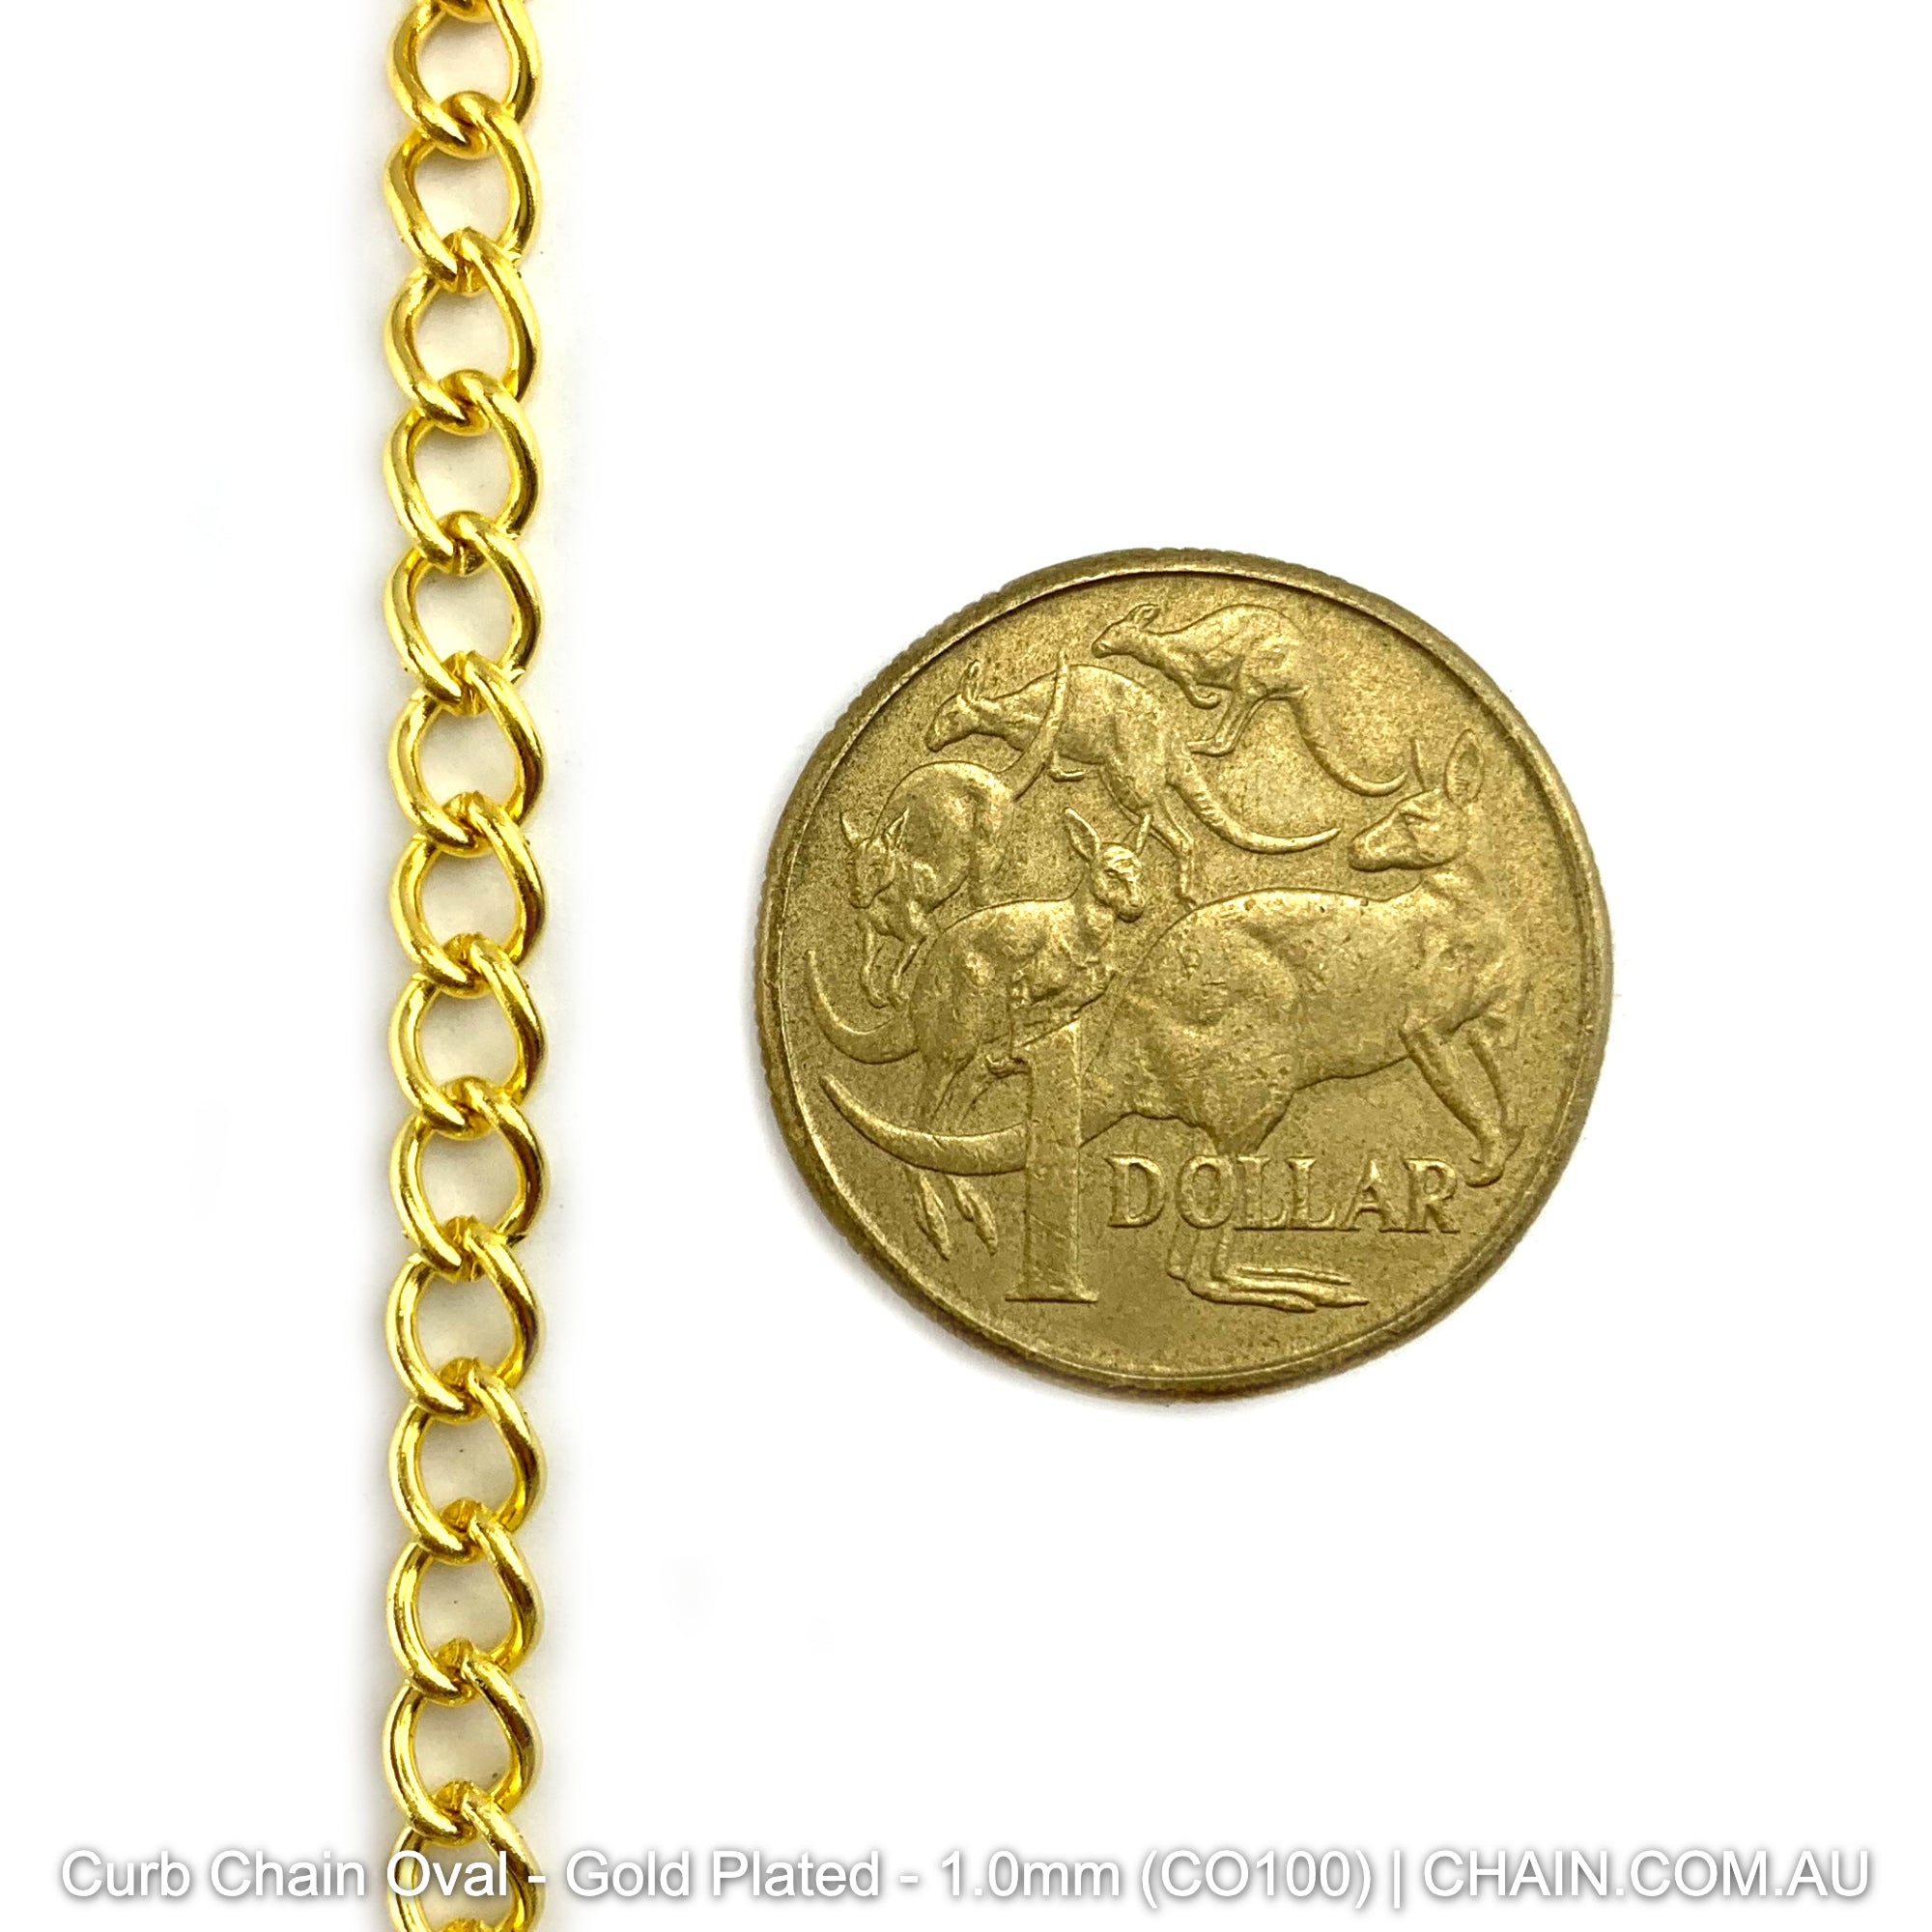 Oval Curb Chain in a Gold Plated Finish. Size: 1.0mm, CO100. Jewellery Chain, Australia wide shipping. Shop chain.com.au